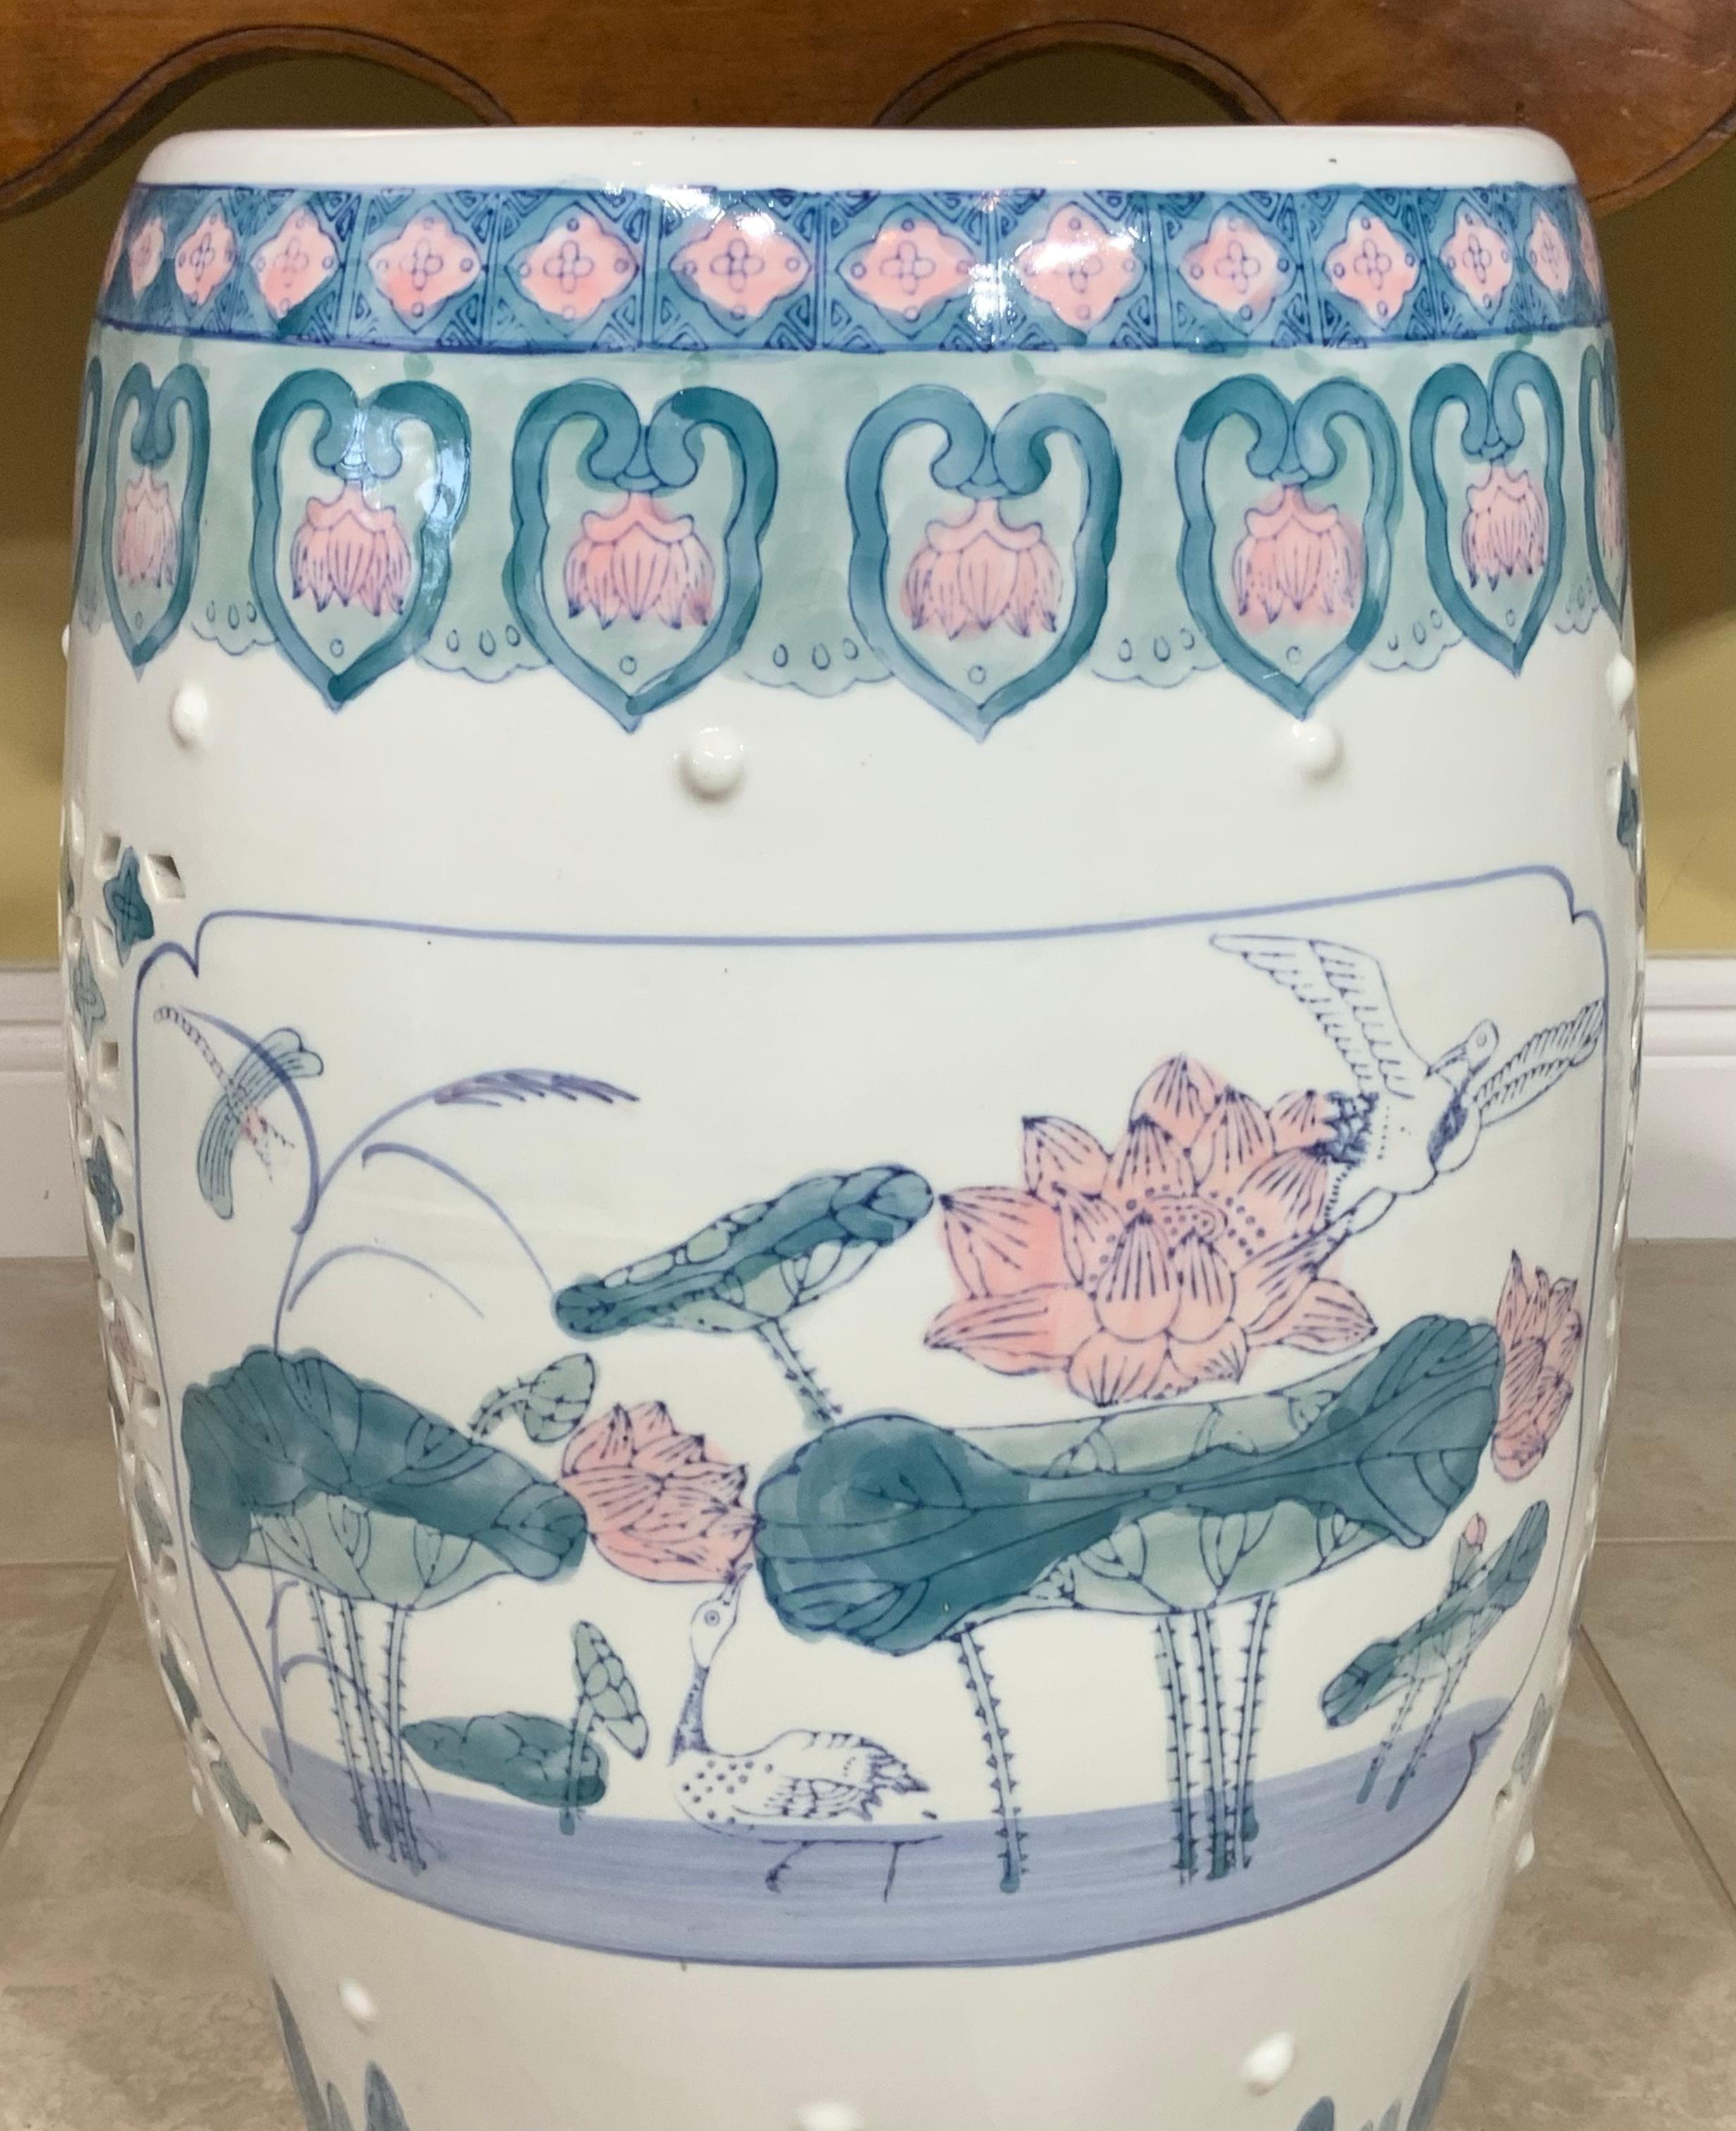 Beautiful garden stool made of ceramic, of Garden scenery with Lotus flowers . Nice border on the top and bottom and soft colors of blue ,green and pink . Could use in outdoor garden or indoor as small side table.
Exceptional object of art for